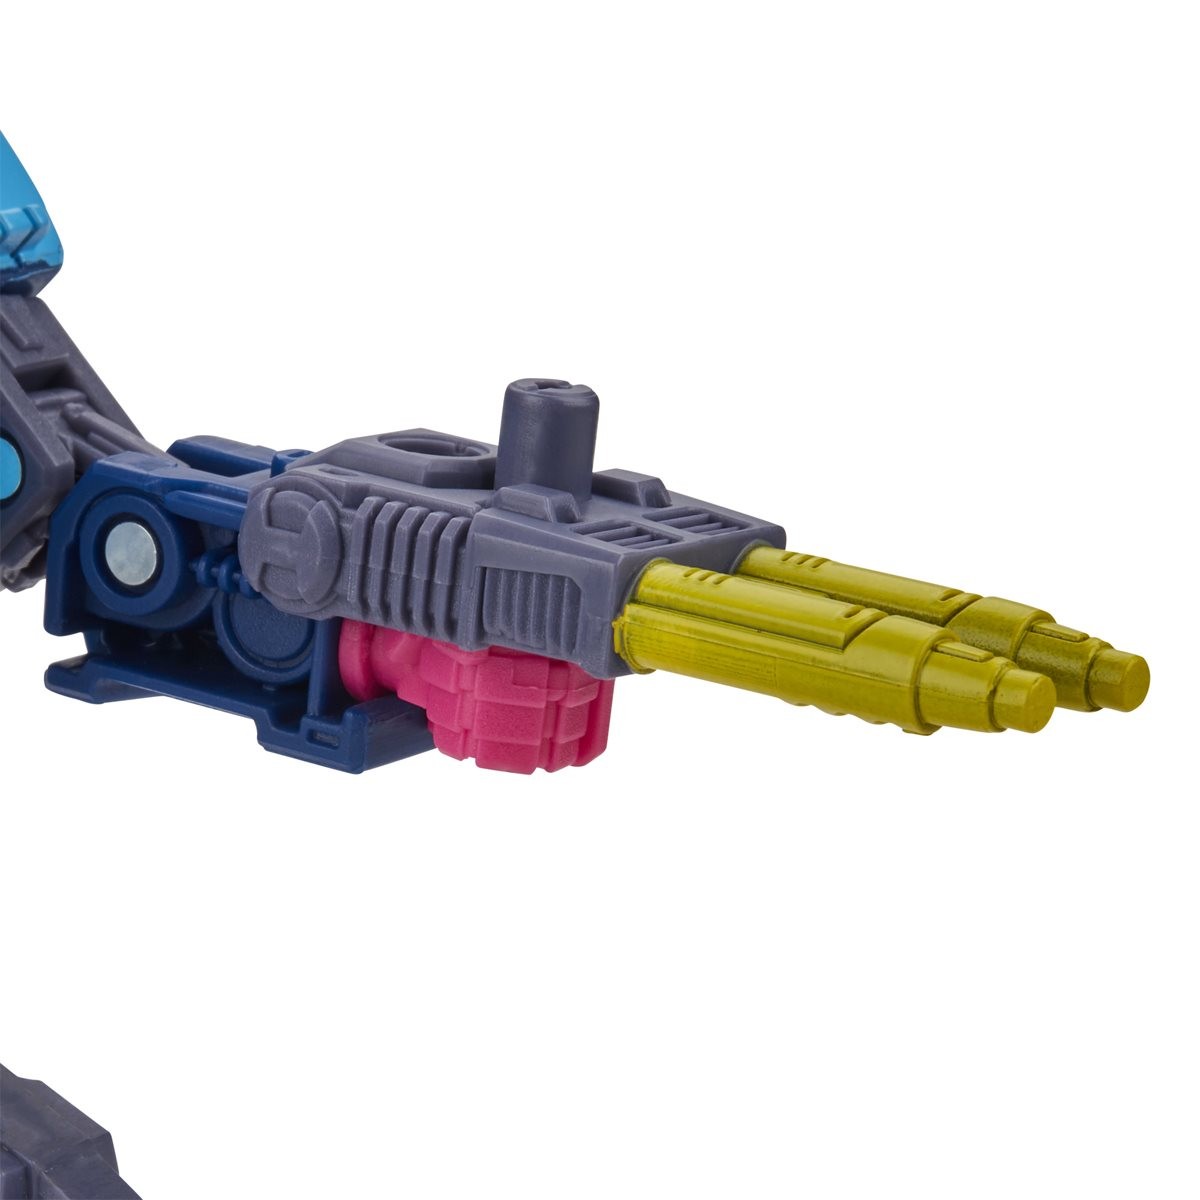 Transformers News: New Transformers Preorders Now Live On Entertainment Earth